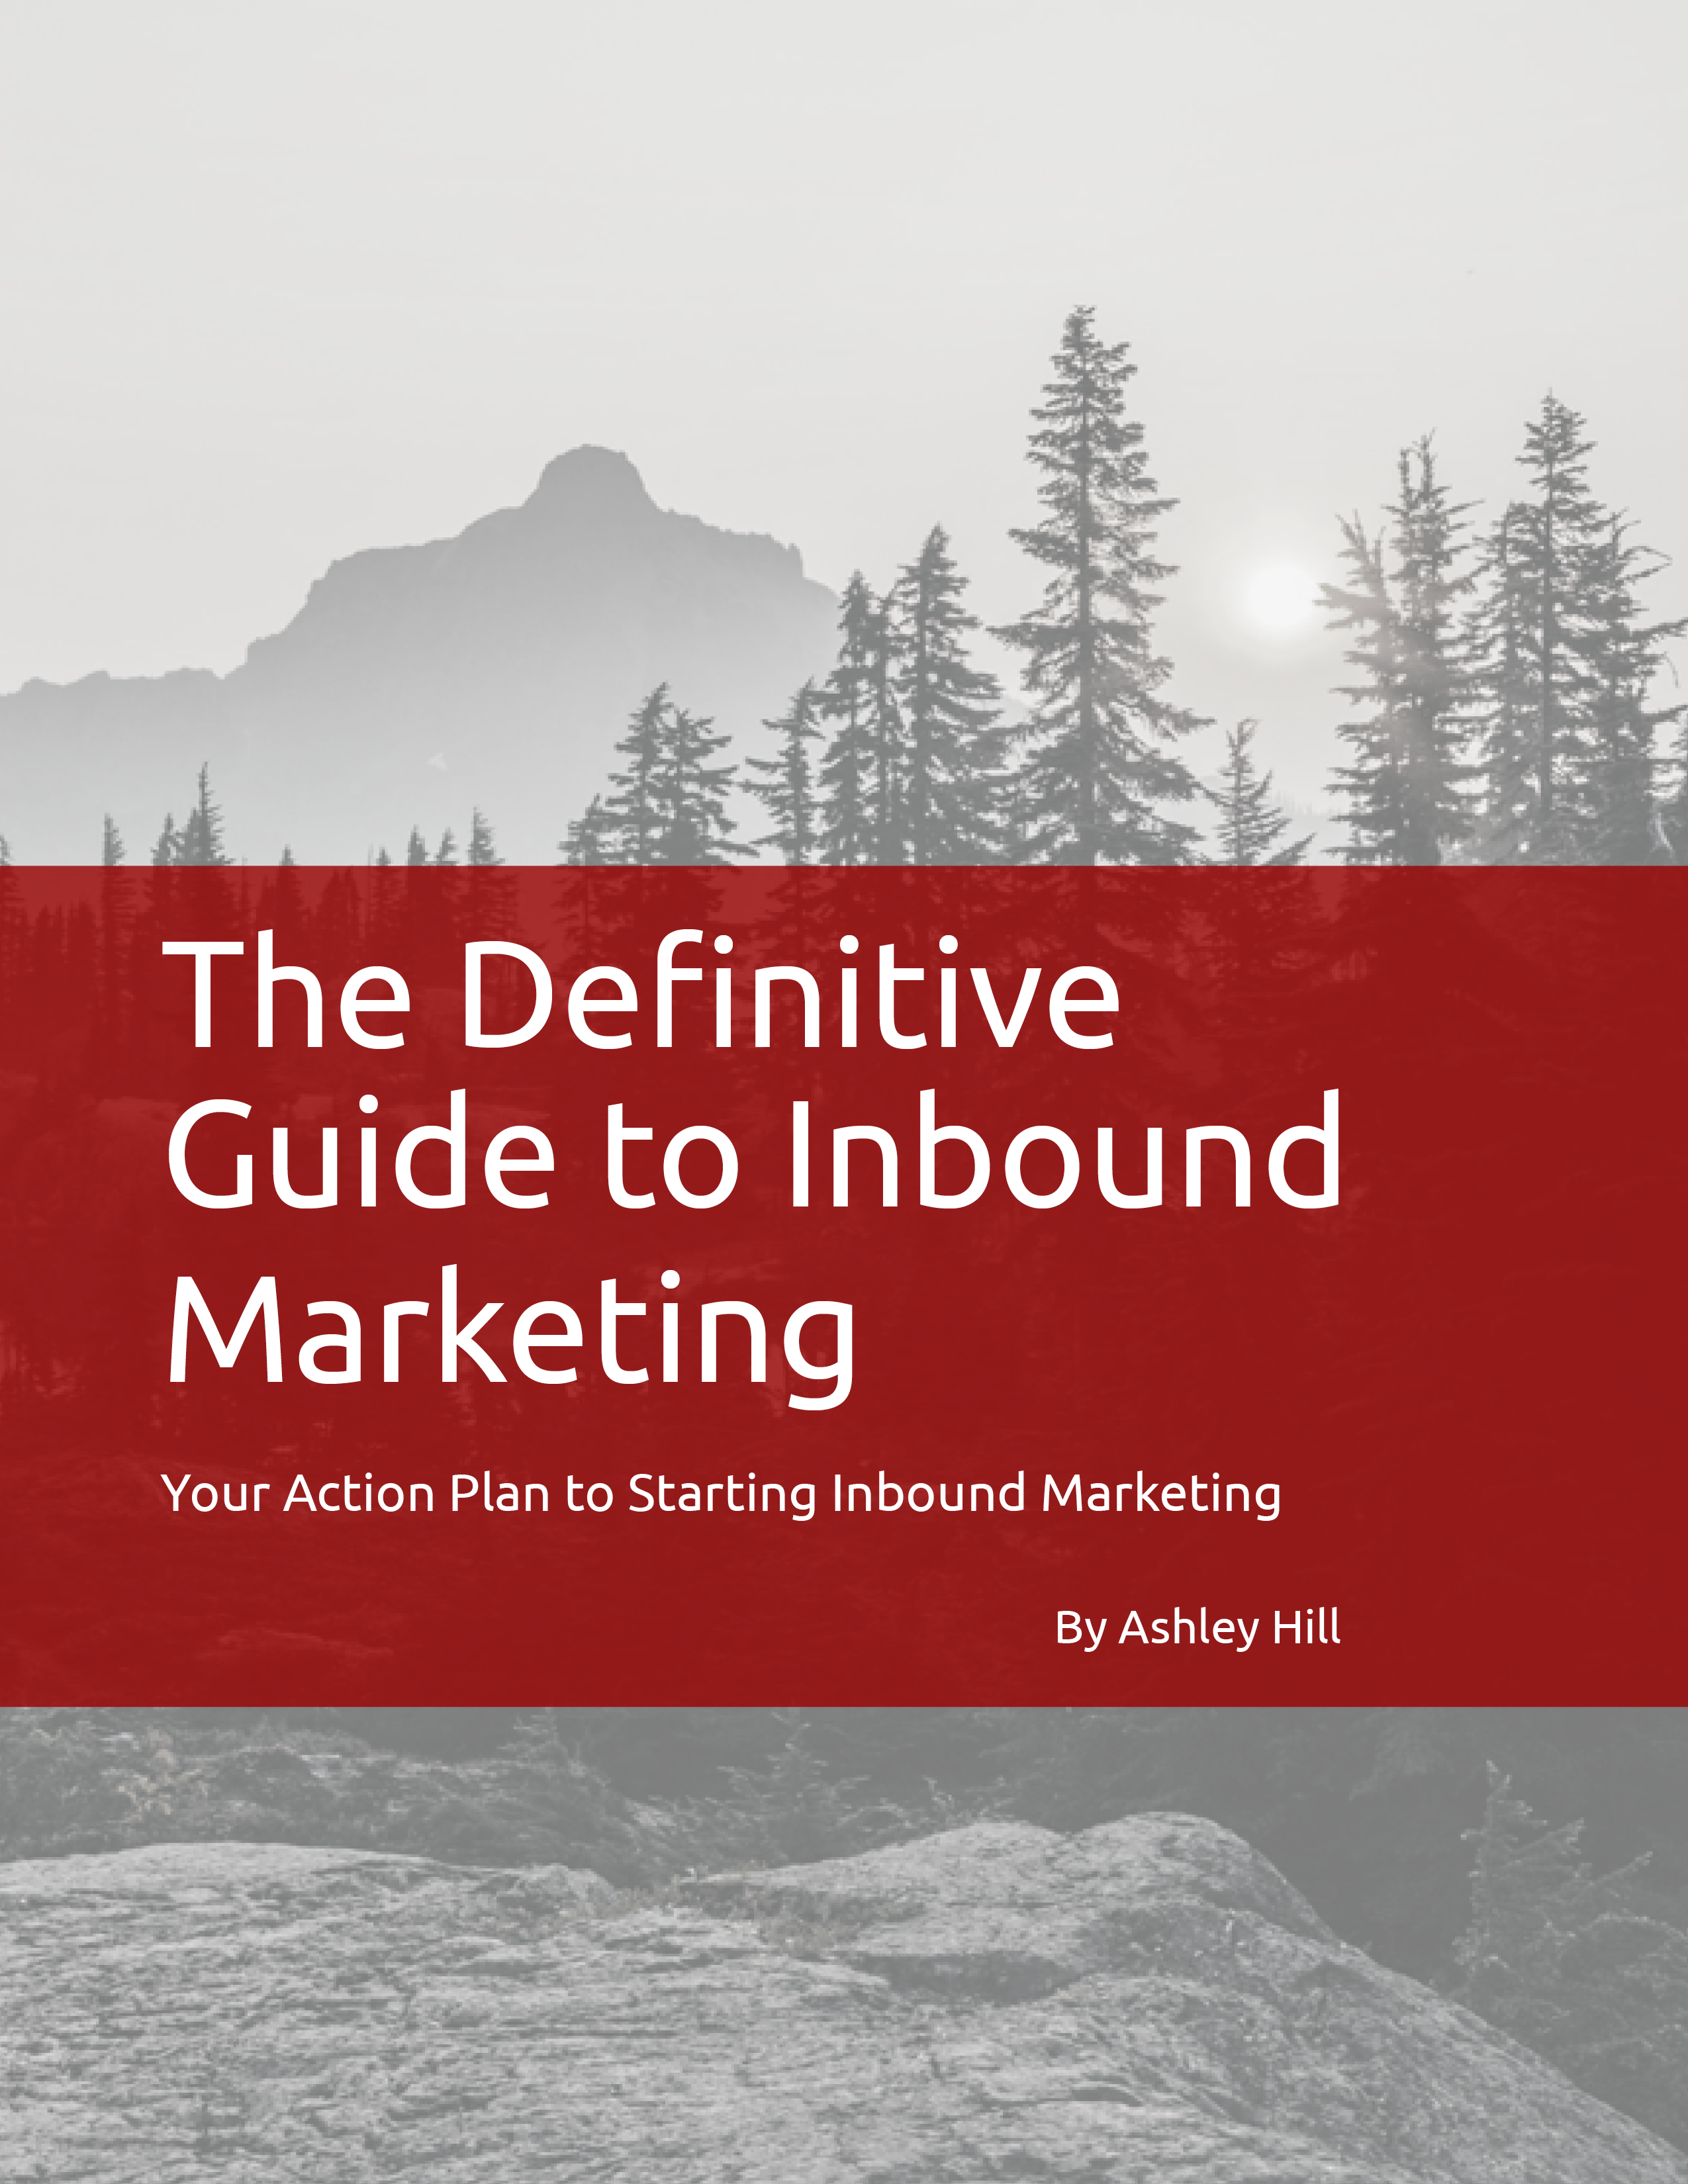 The Definitive Guide to Inbound Marketing